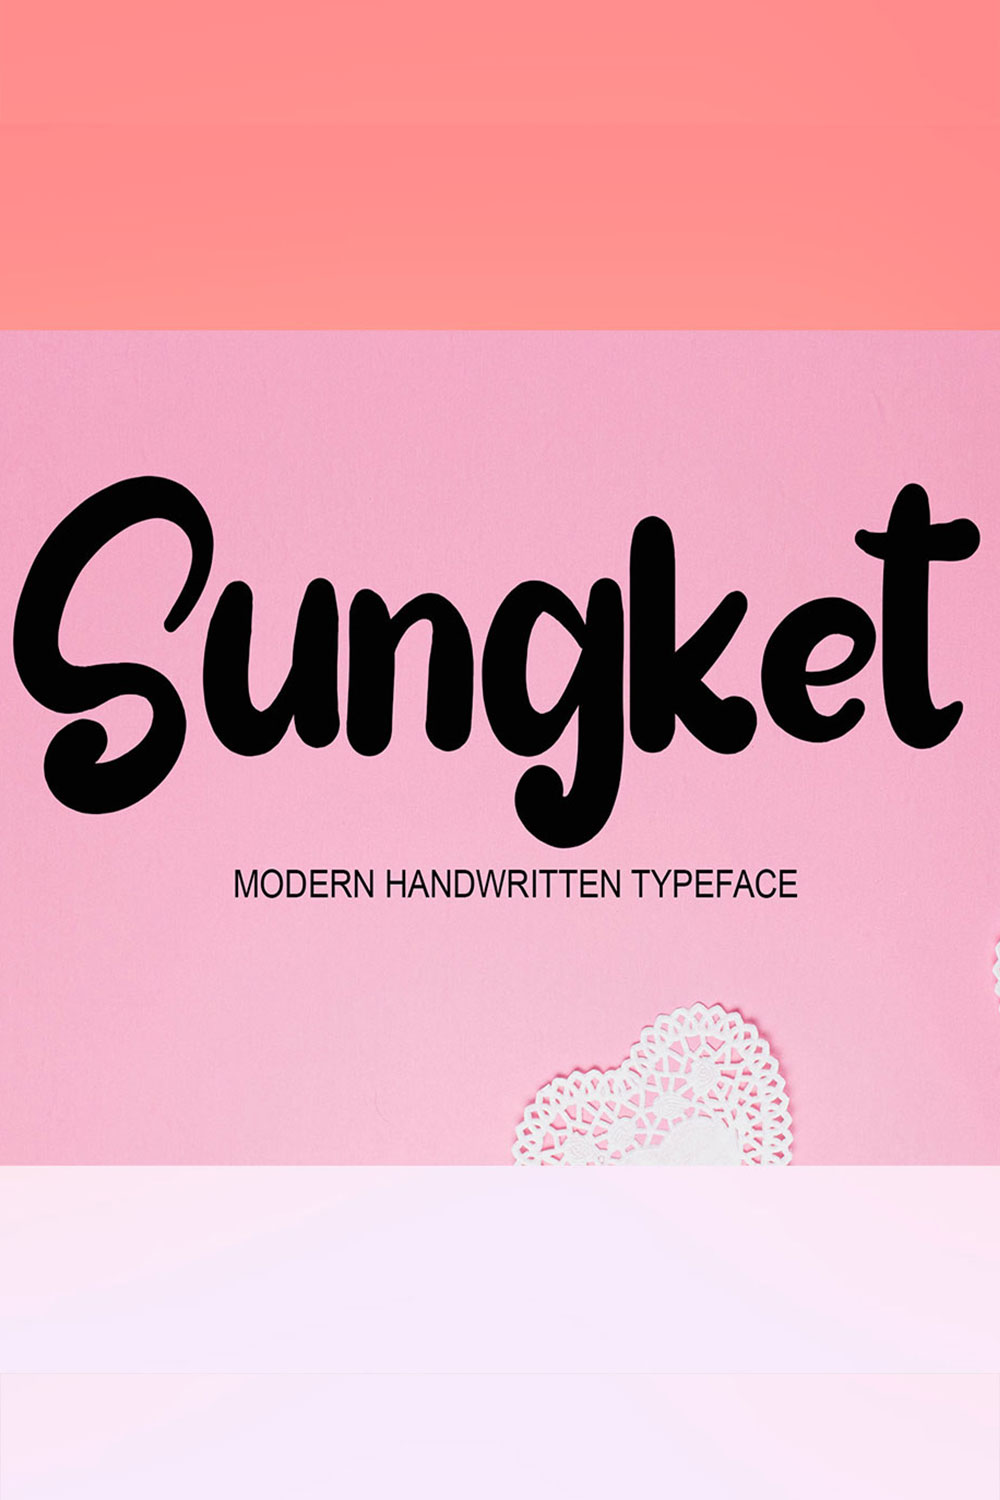 An image with text showing the enchanting Sungket font